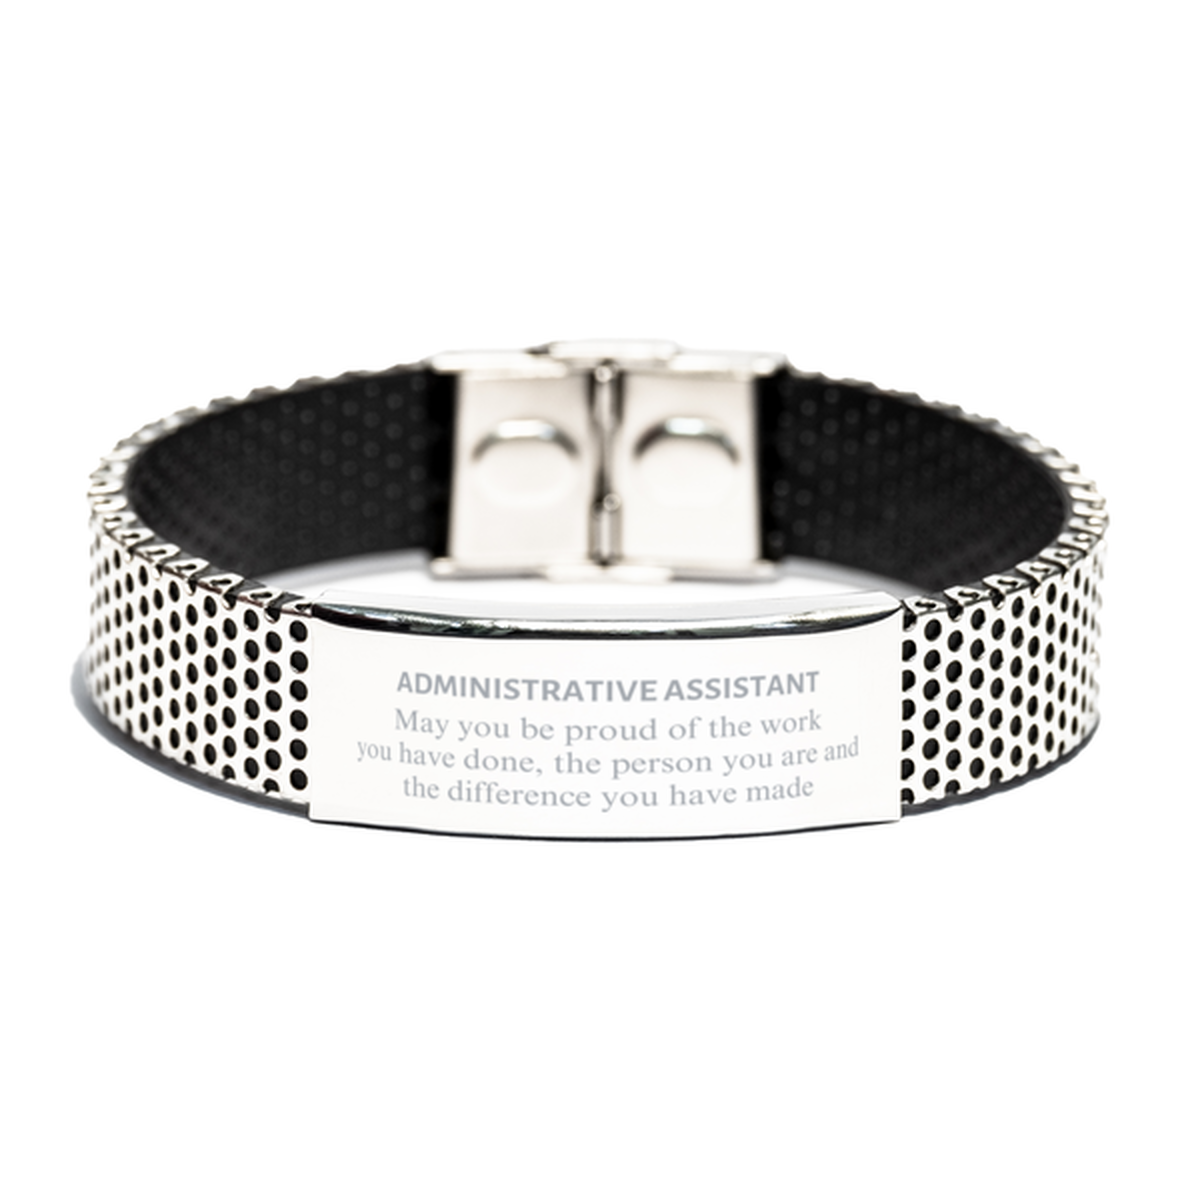 Administrative Assistant May you be proud of the work you have done, Retirement Administrative Assistant Stainless Steel Bracelet for Colleague Appreciation Gifts Amazing for Administrative Assistant